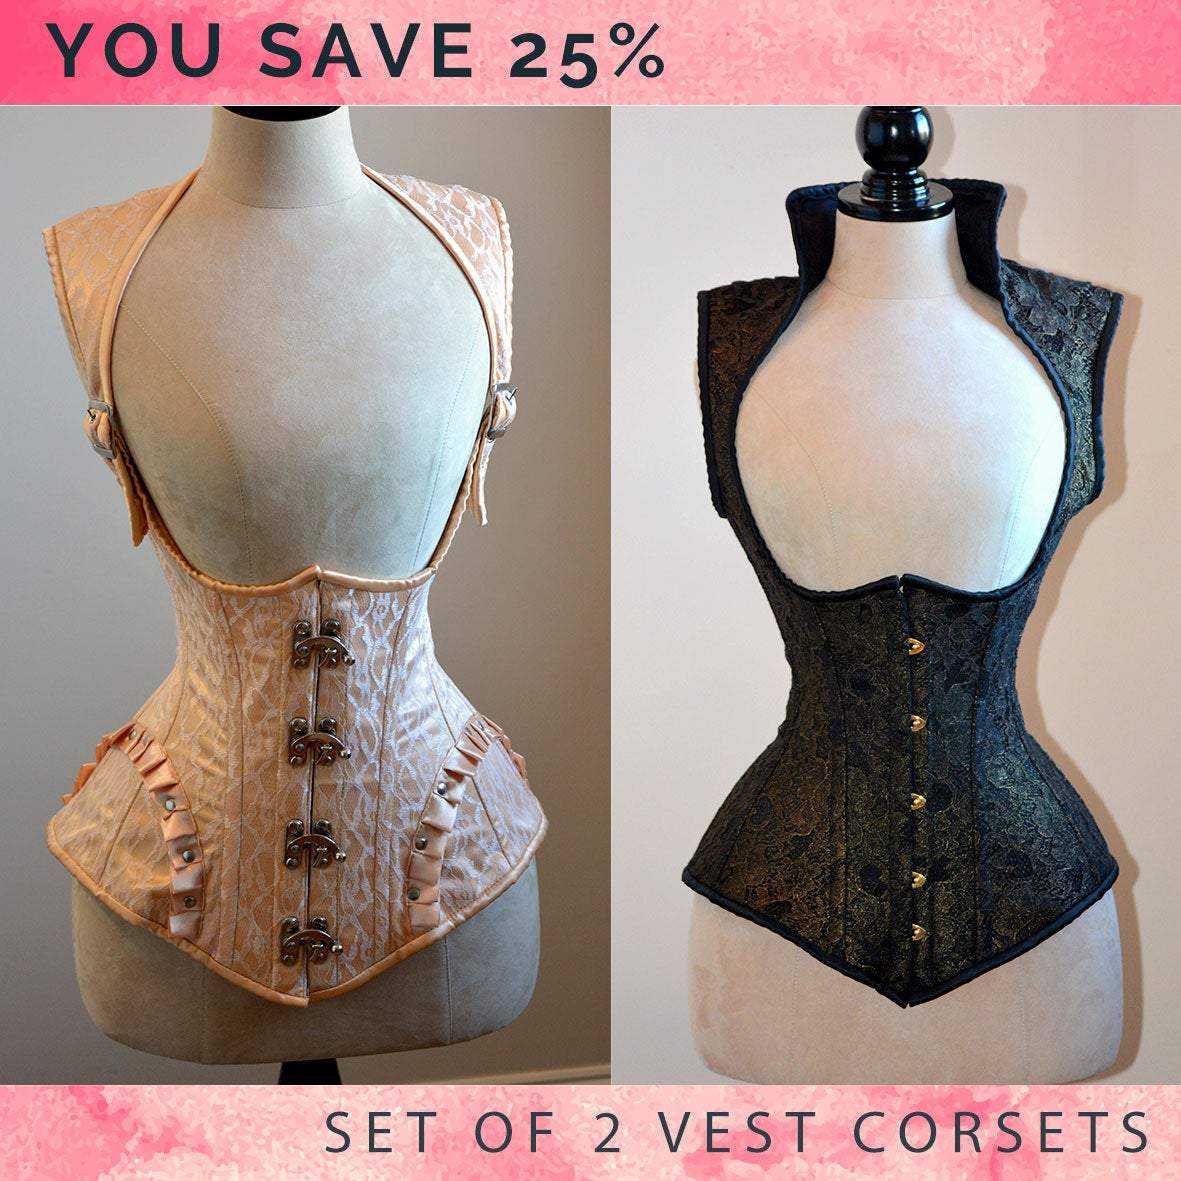 Salmon color leather corset vest with shoulder straps and chains. Stee –  Corsettery Authentic Corsets USA